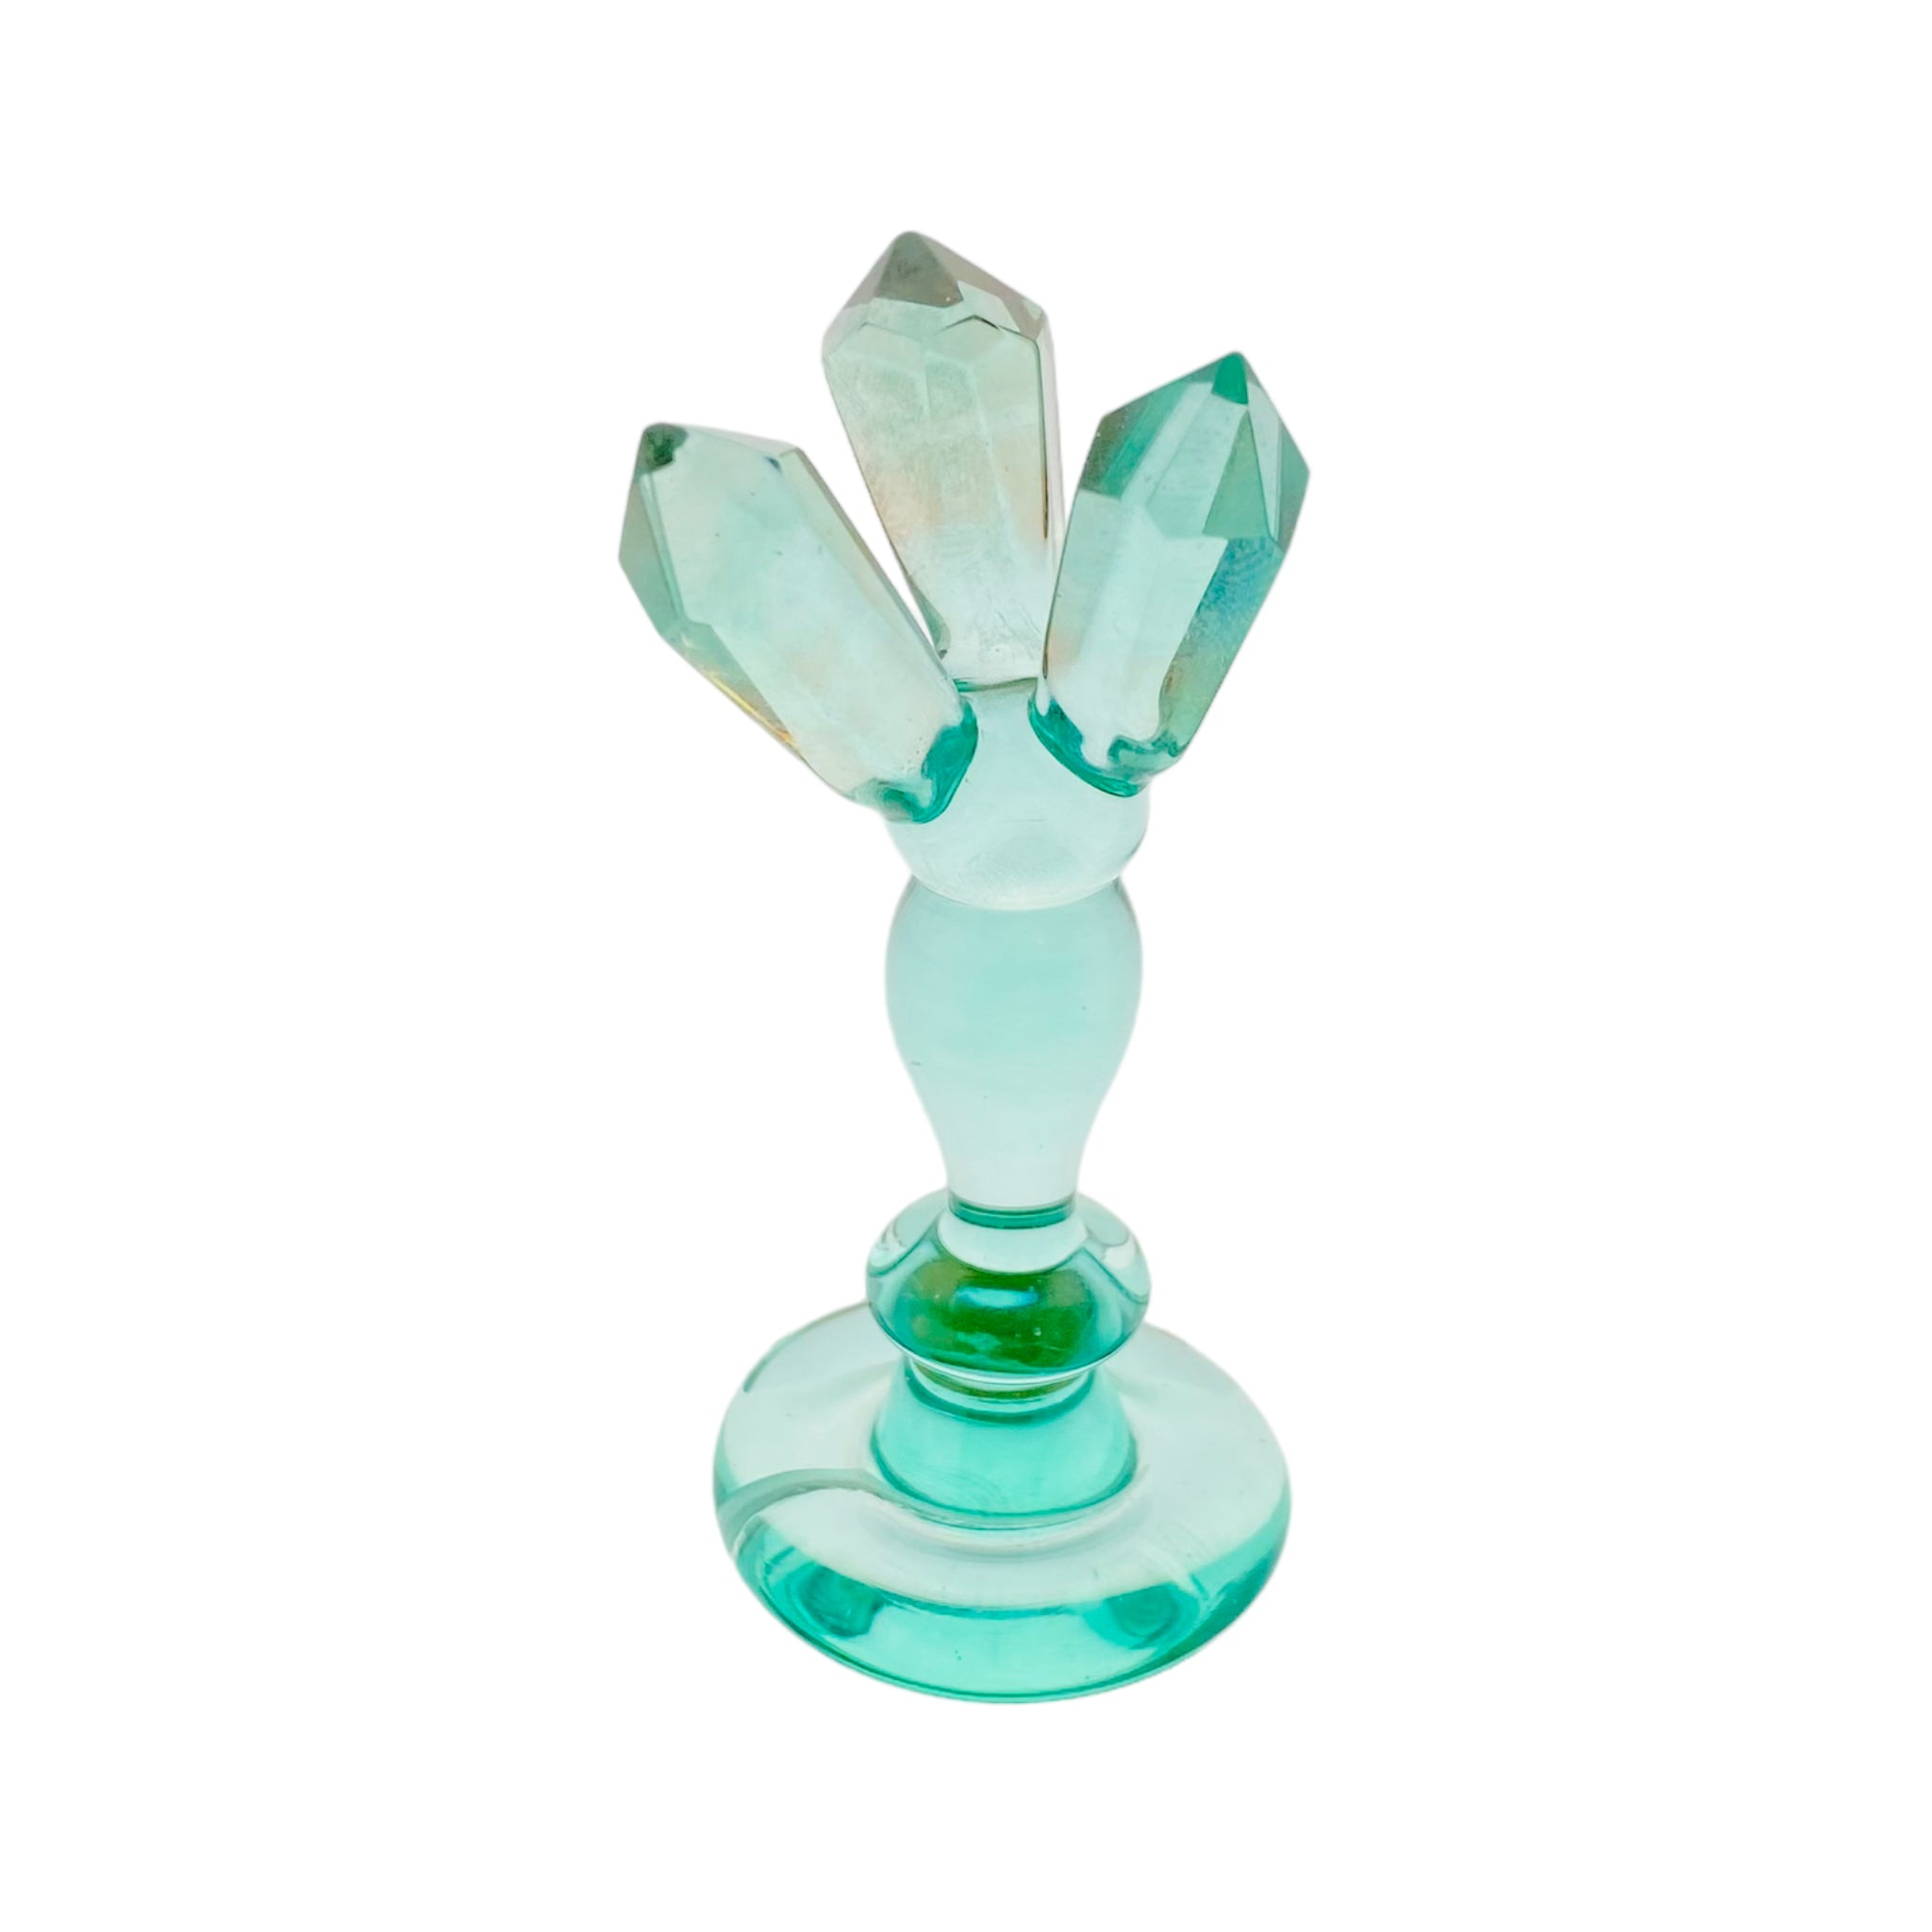 Aqua Teal Crystal Carb Cap with decorative hand faceted crystals 